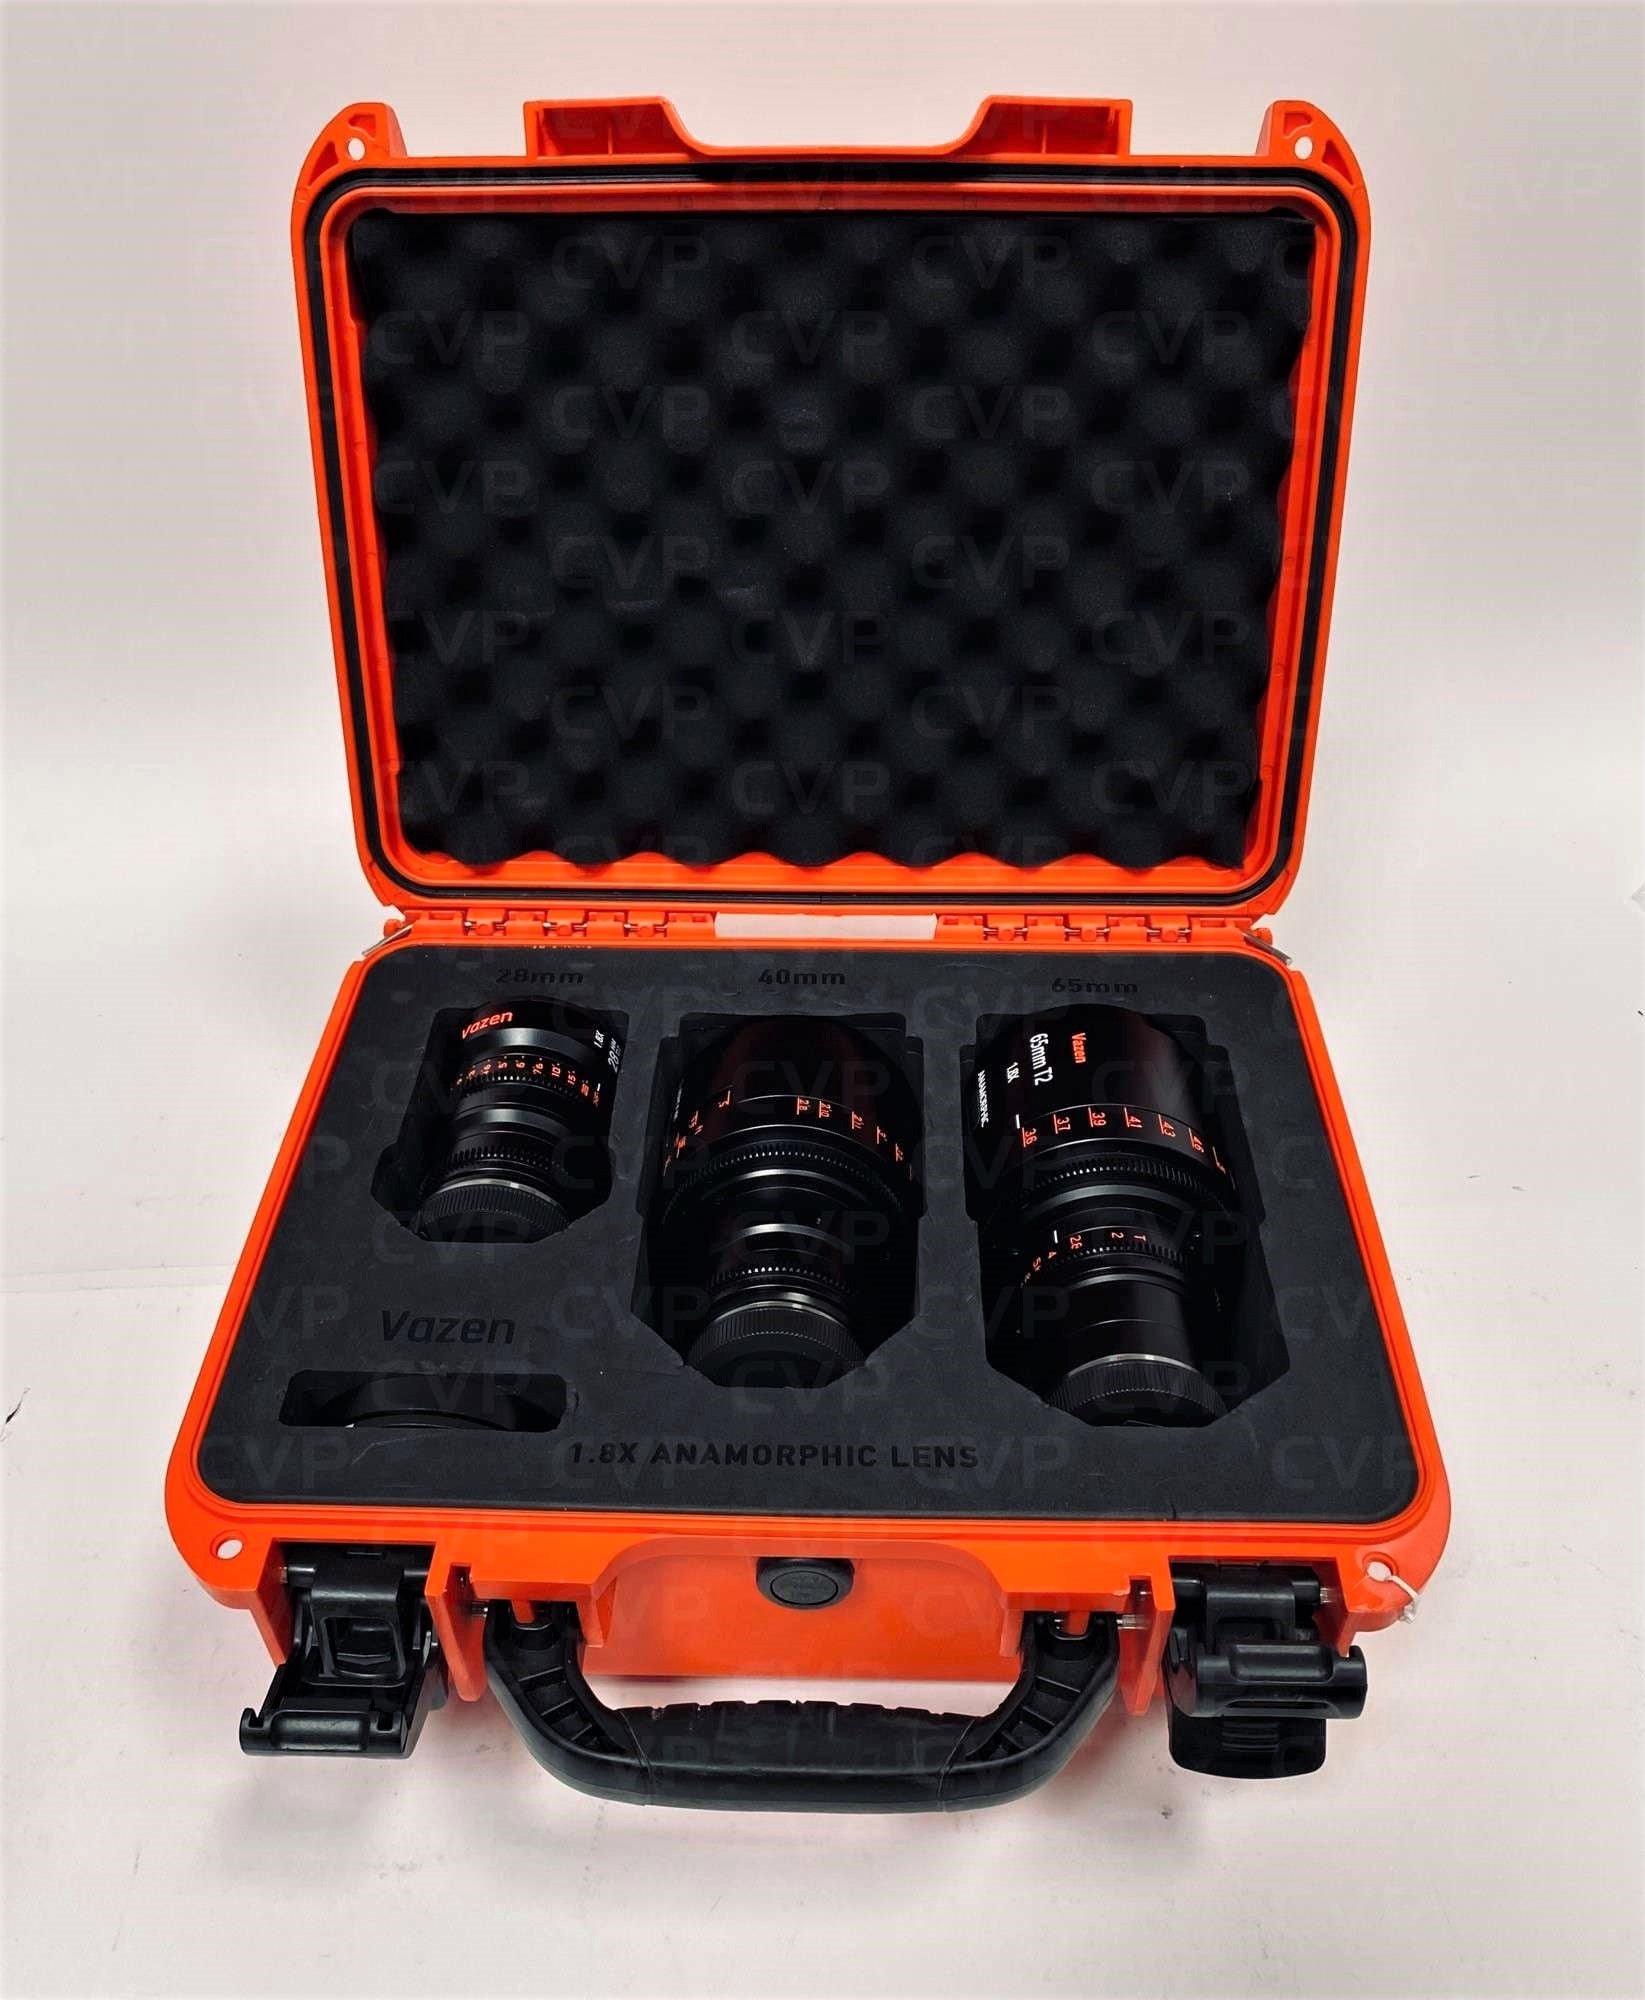 Vazen 28, 40, 65mm 1.8x Anamorphic Lens Bundle for RF Camera Attached on the Case